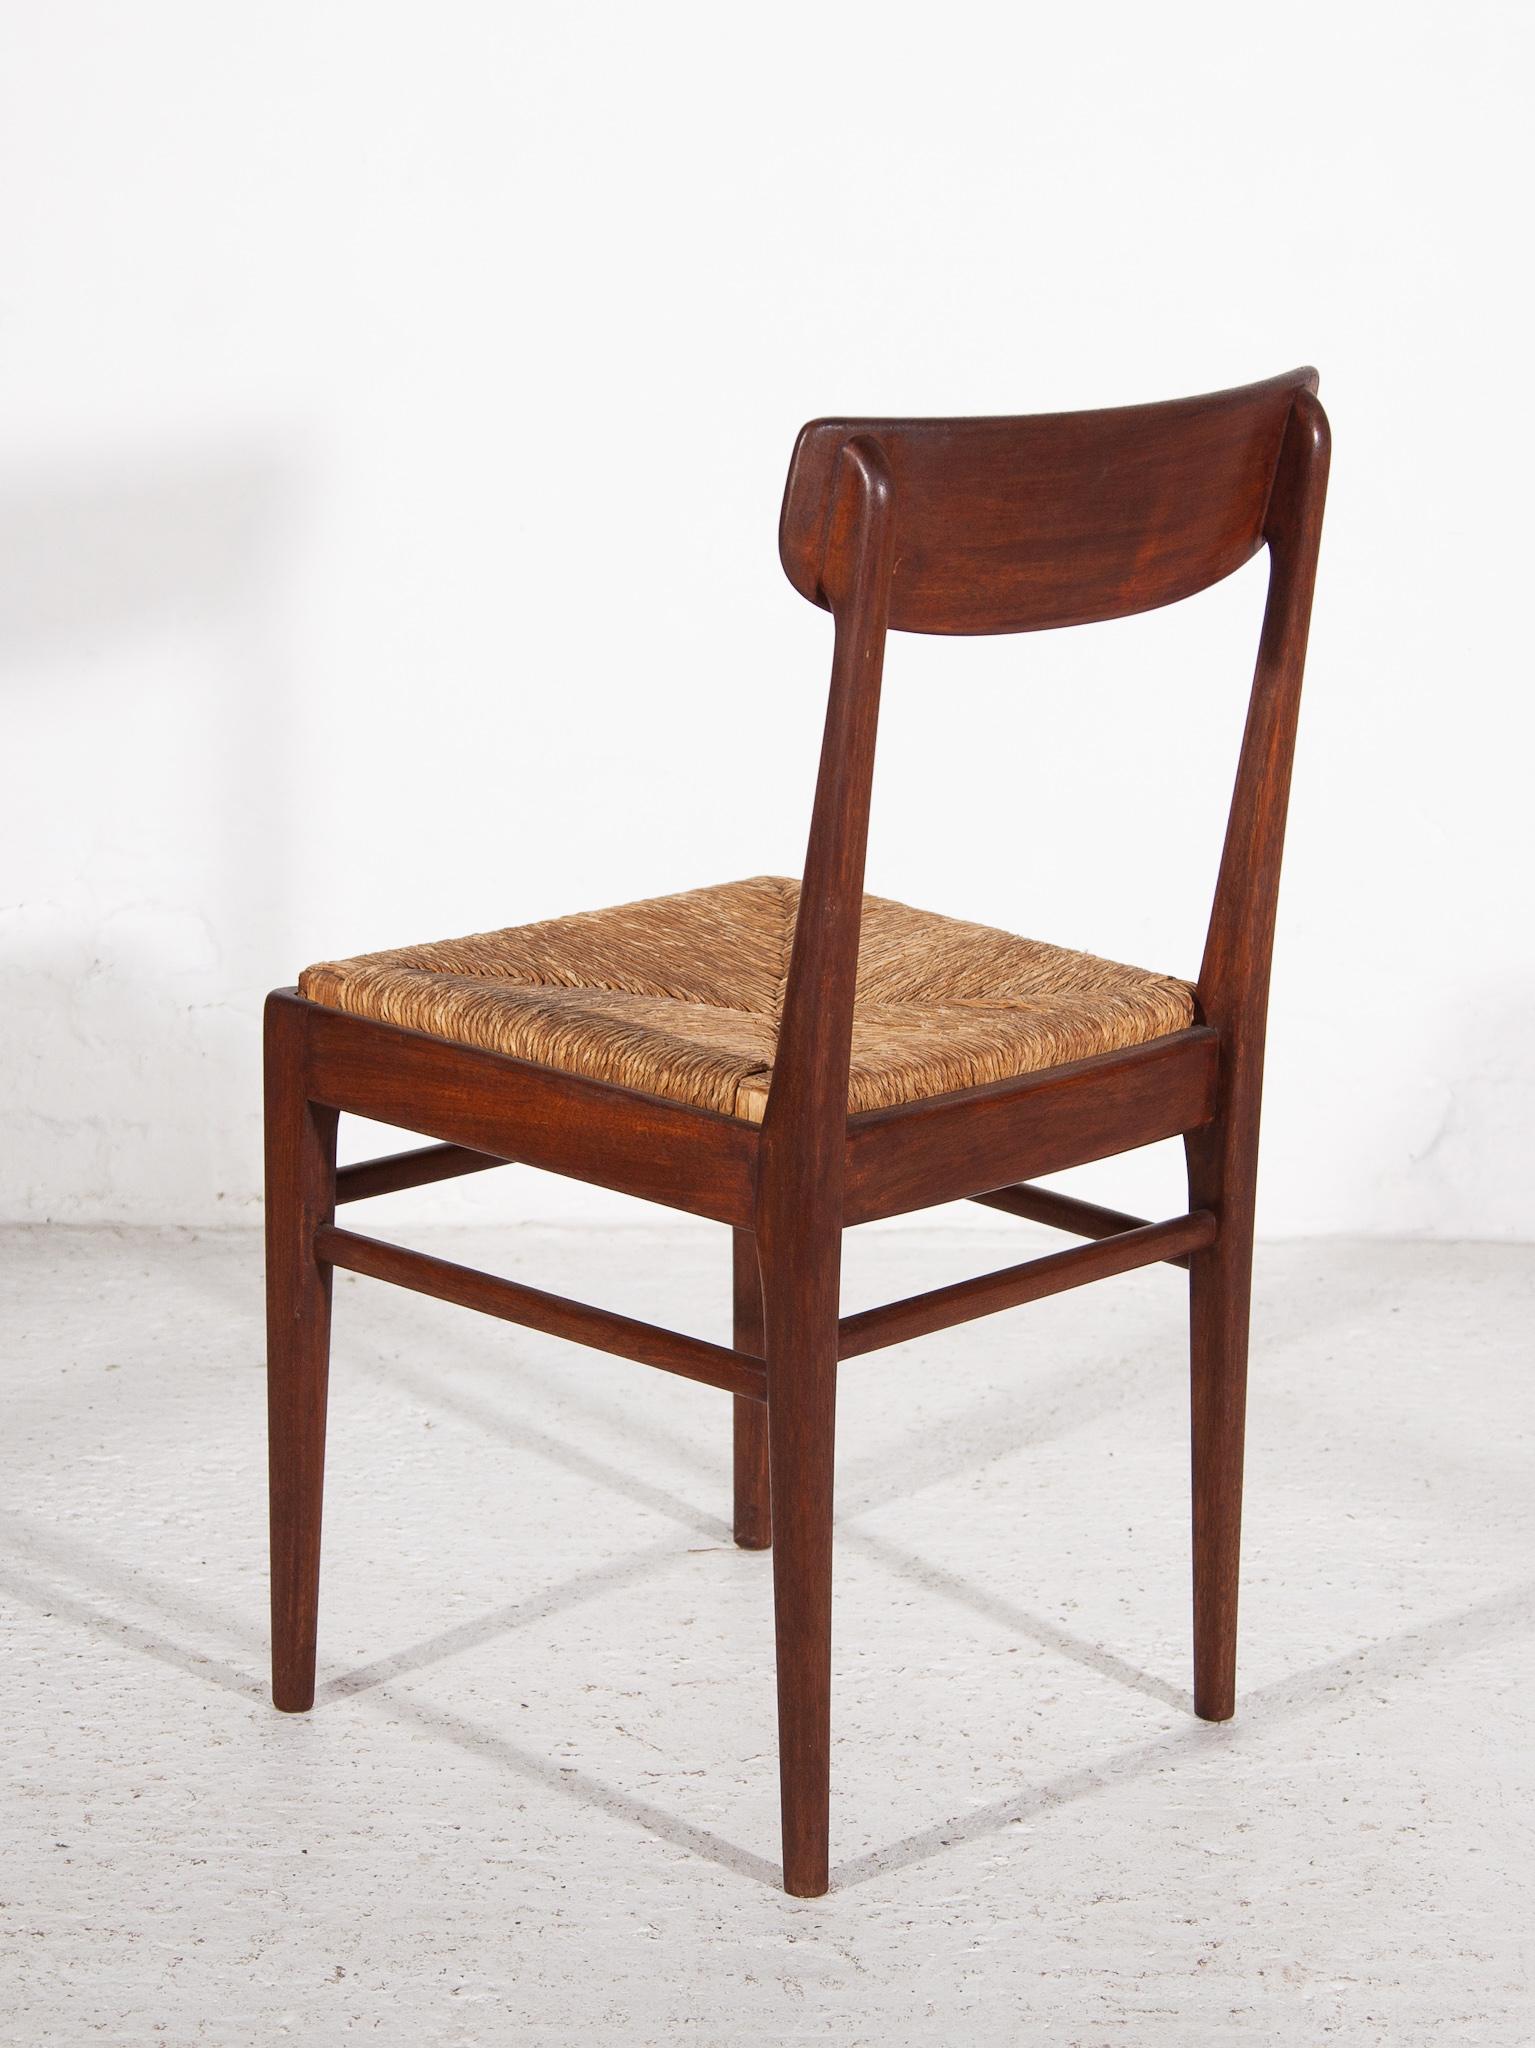 Teak Dining Chairs with Rattan Sea, t 1959, Belgium For Sale 1